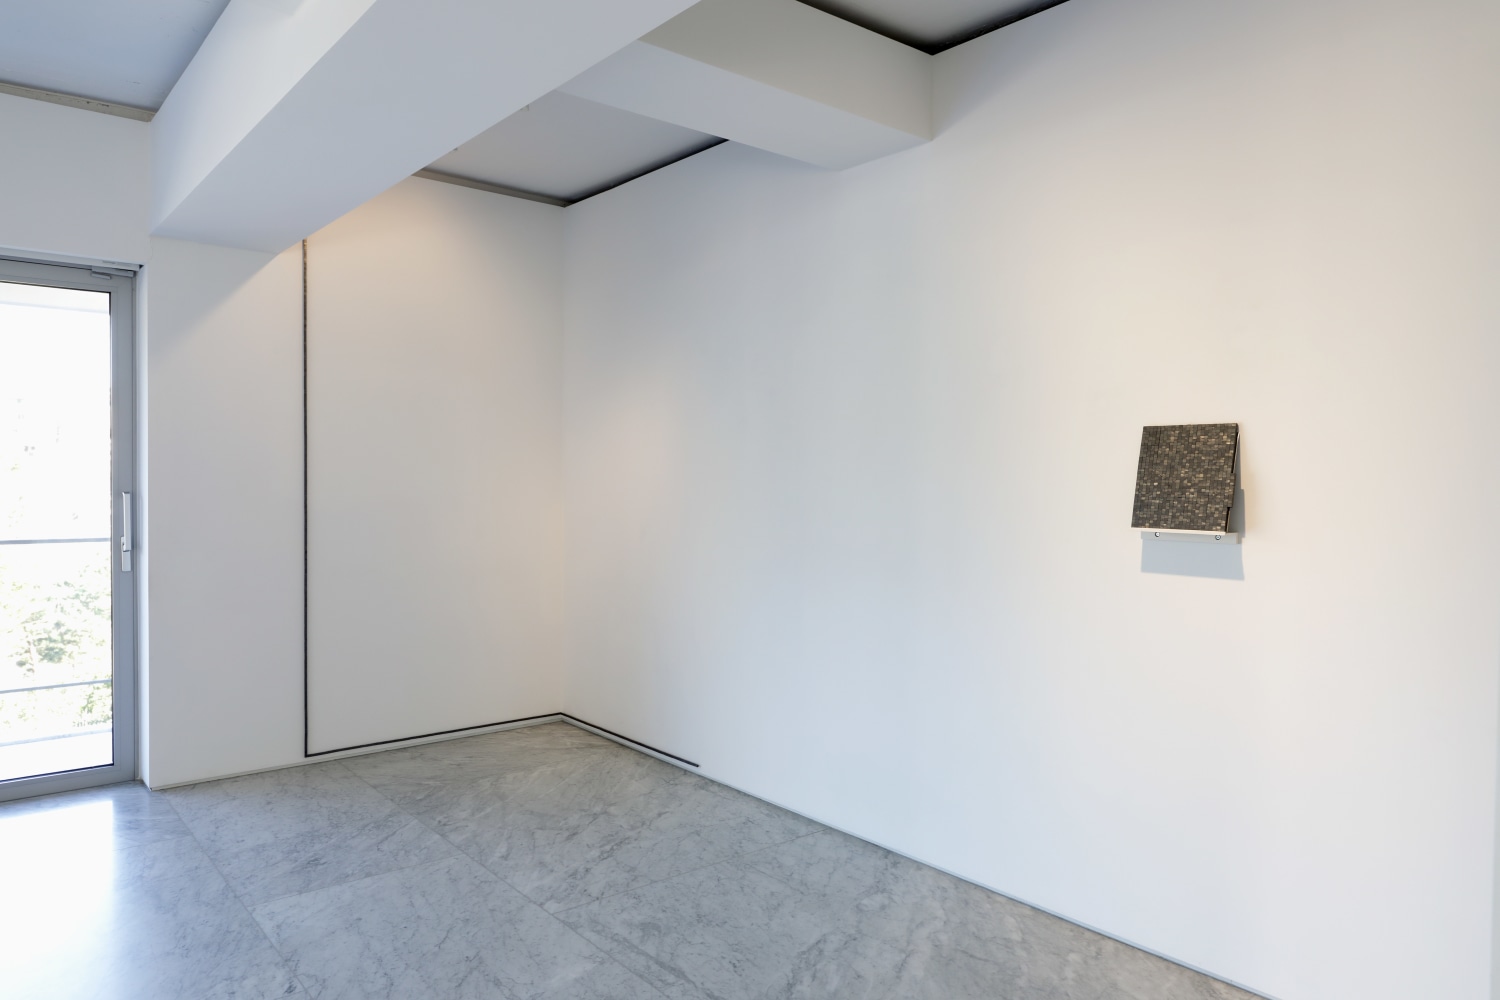 Installation view of&amp;nbsp;Koo Jeong A:2O2O at PKM+, Seoul, 2020

Courtesy of the artist &amp;amp; PKM Gallery